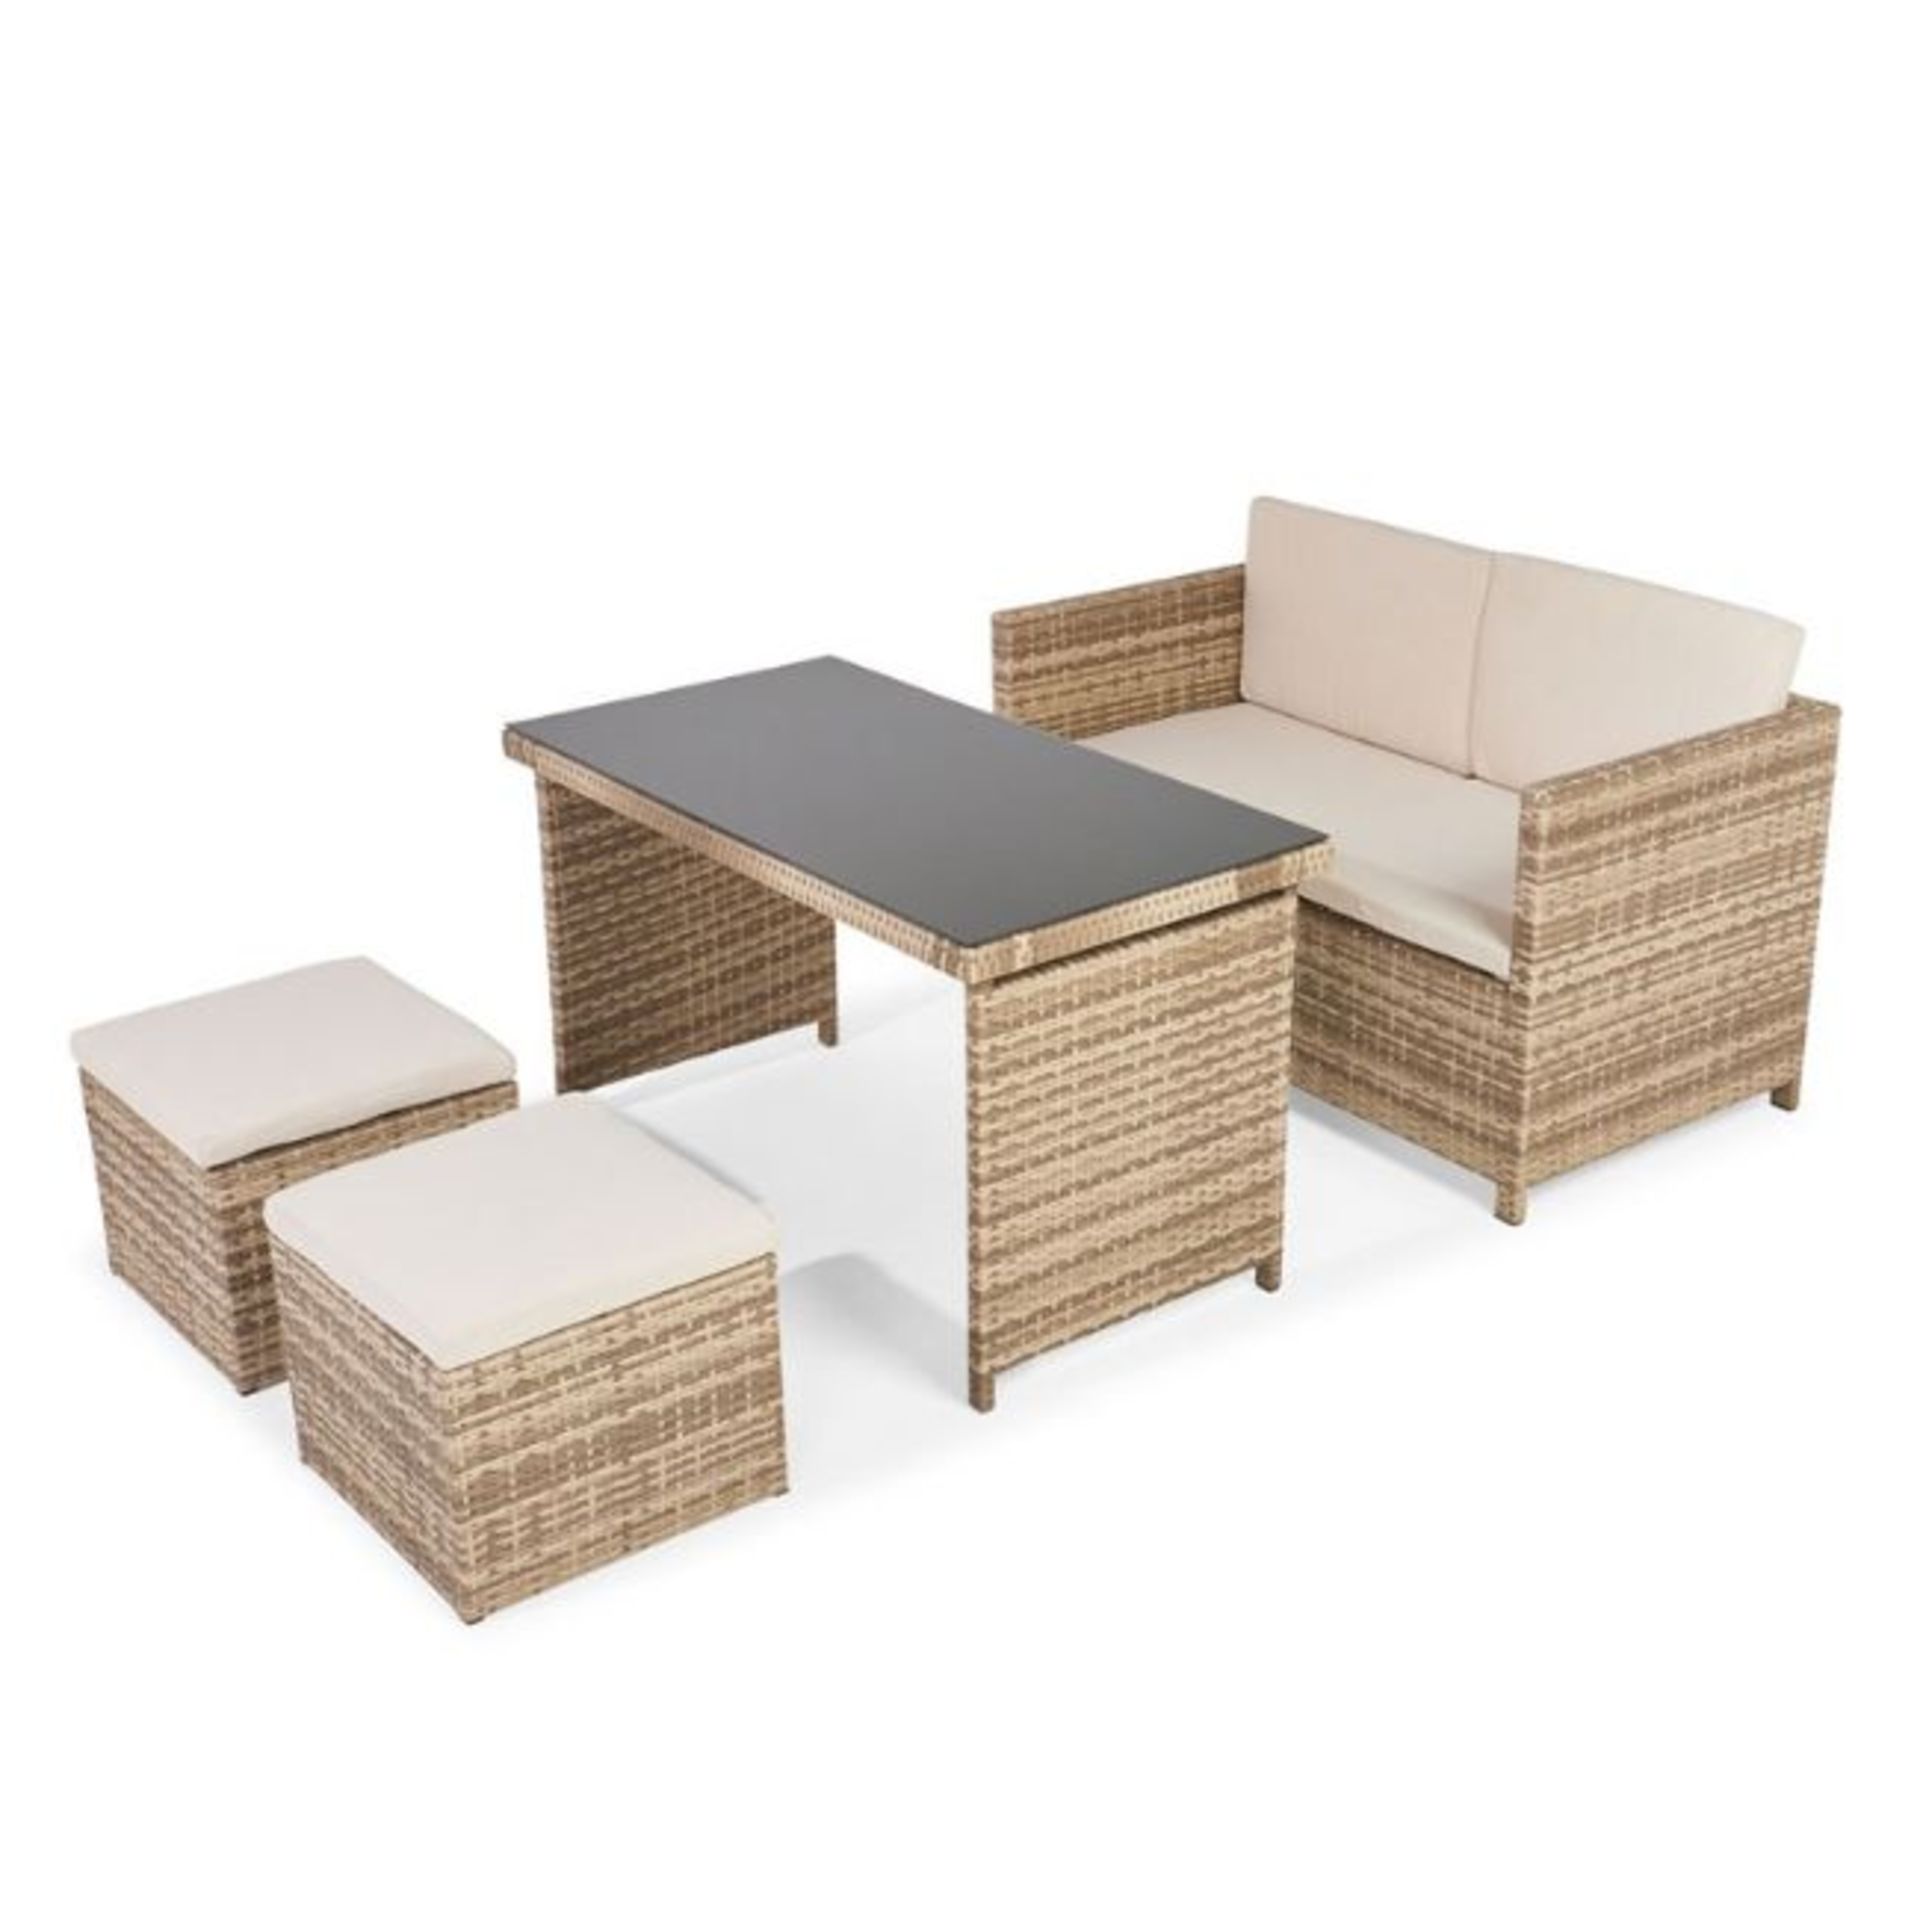 ABLO Orion 4 Seater Rattan Dining Set - ABLOXLS018 - Image 2 of 2